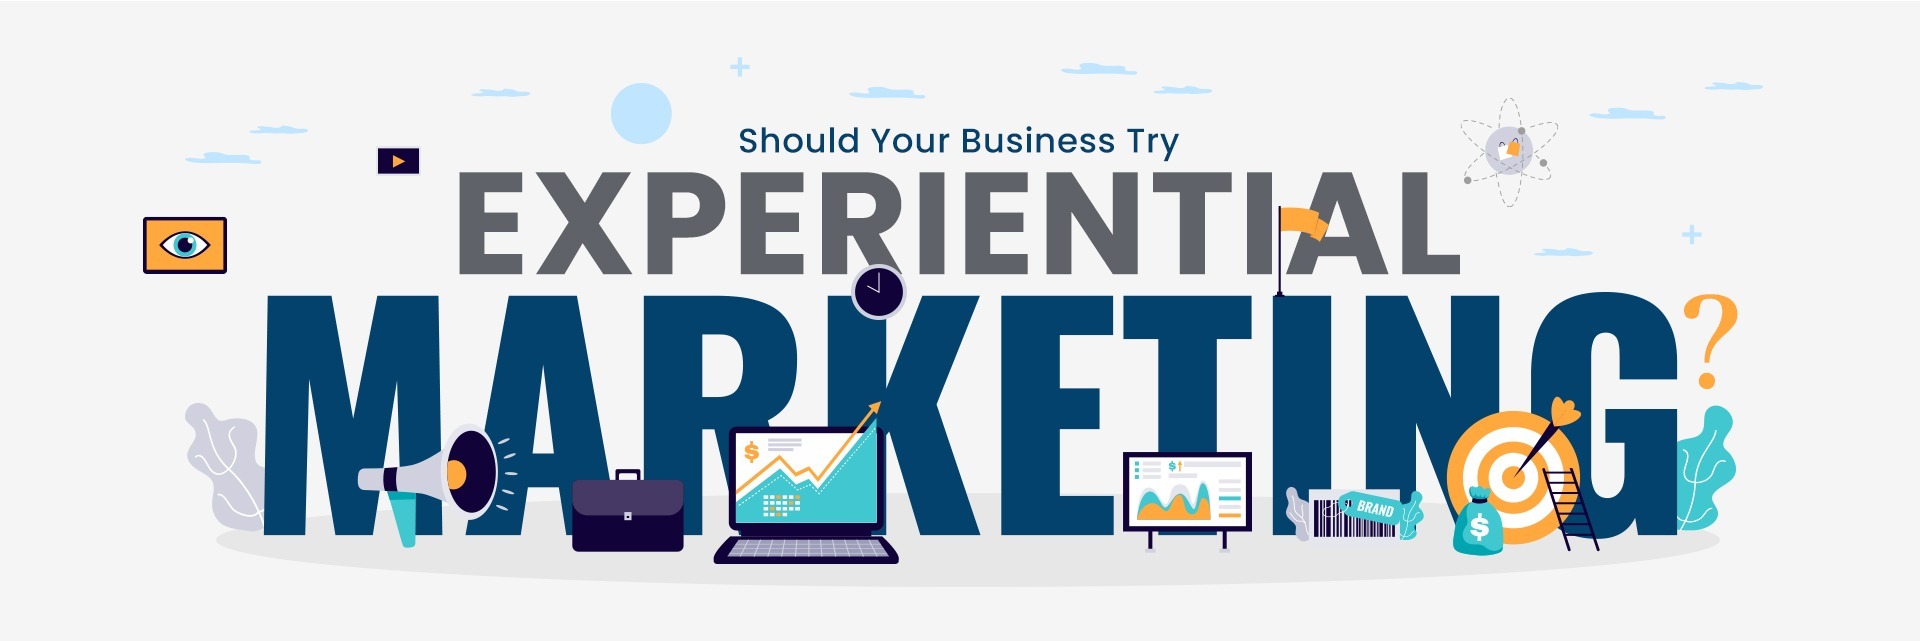 Should Your Business Try Experiential Marketing?